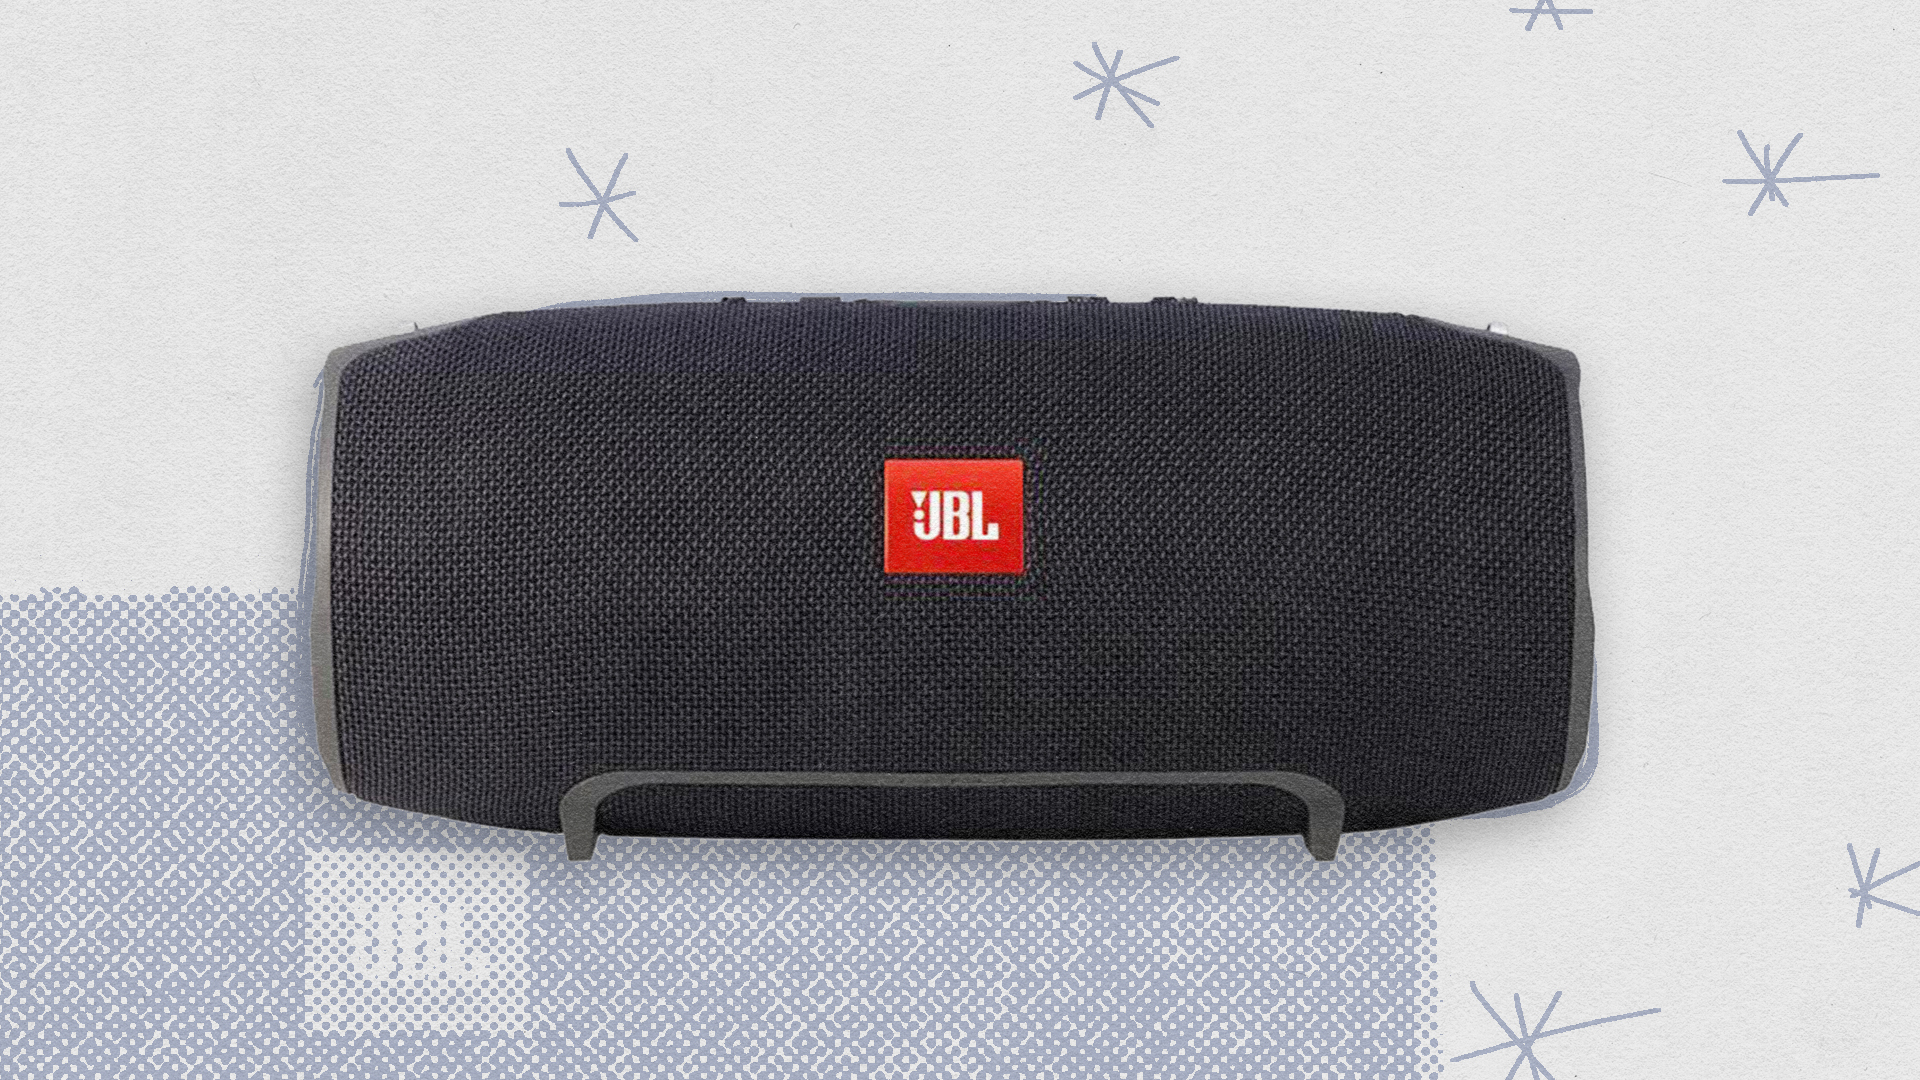 JBL Charge 4 Portable Bluetooth Speaker from Newegg